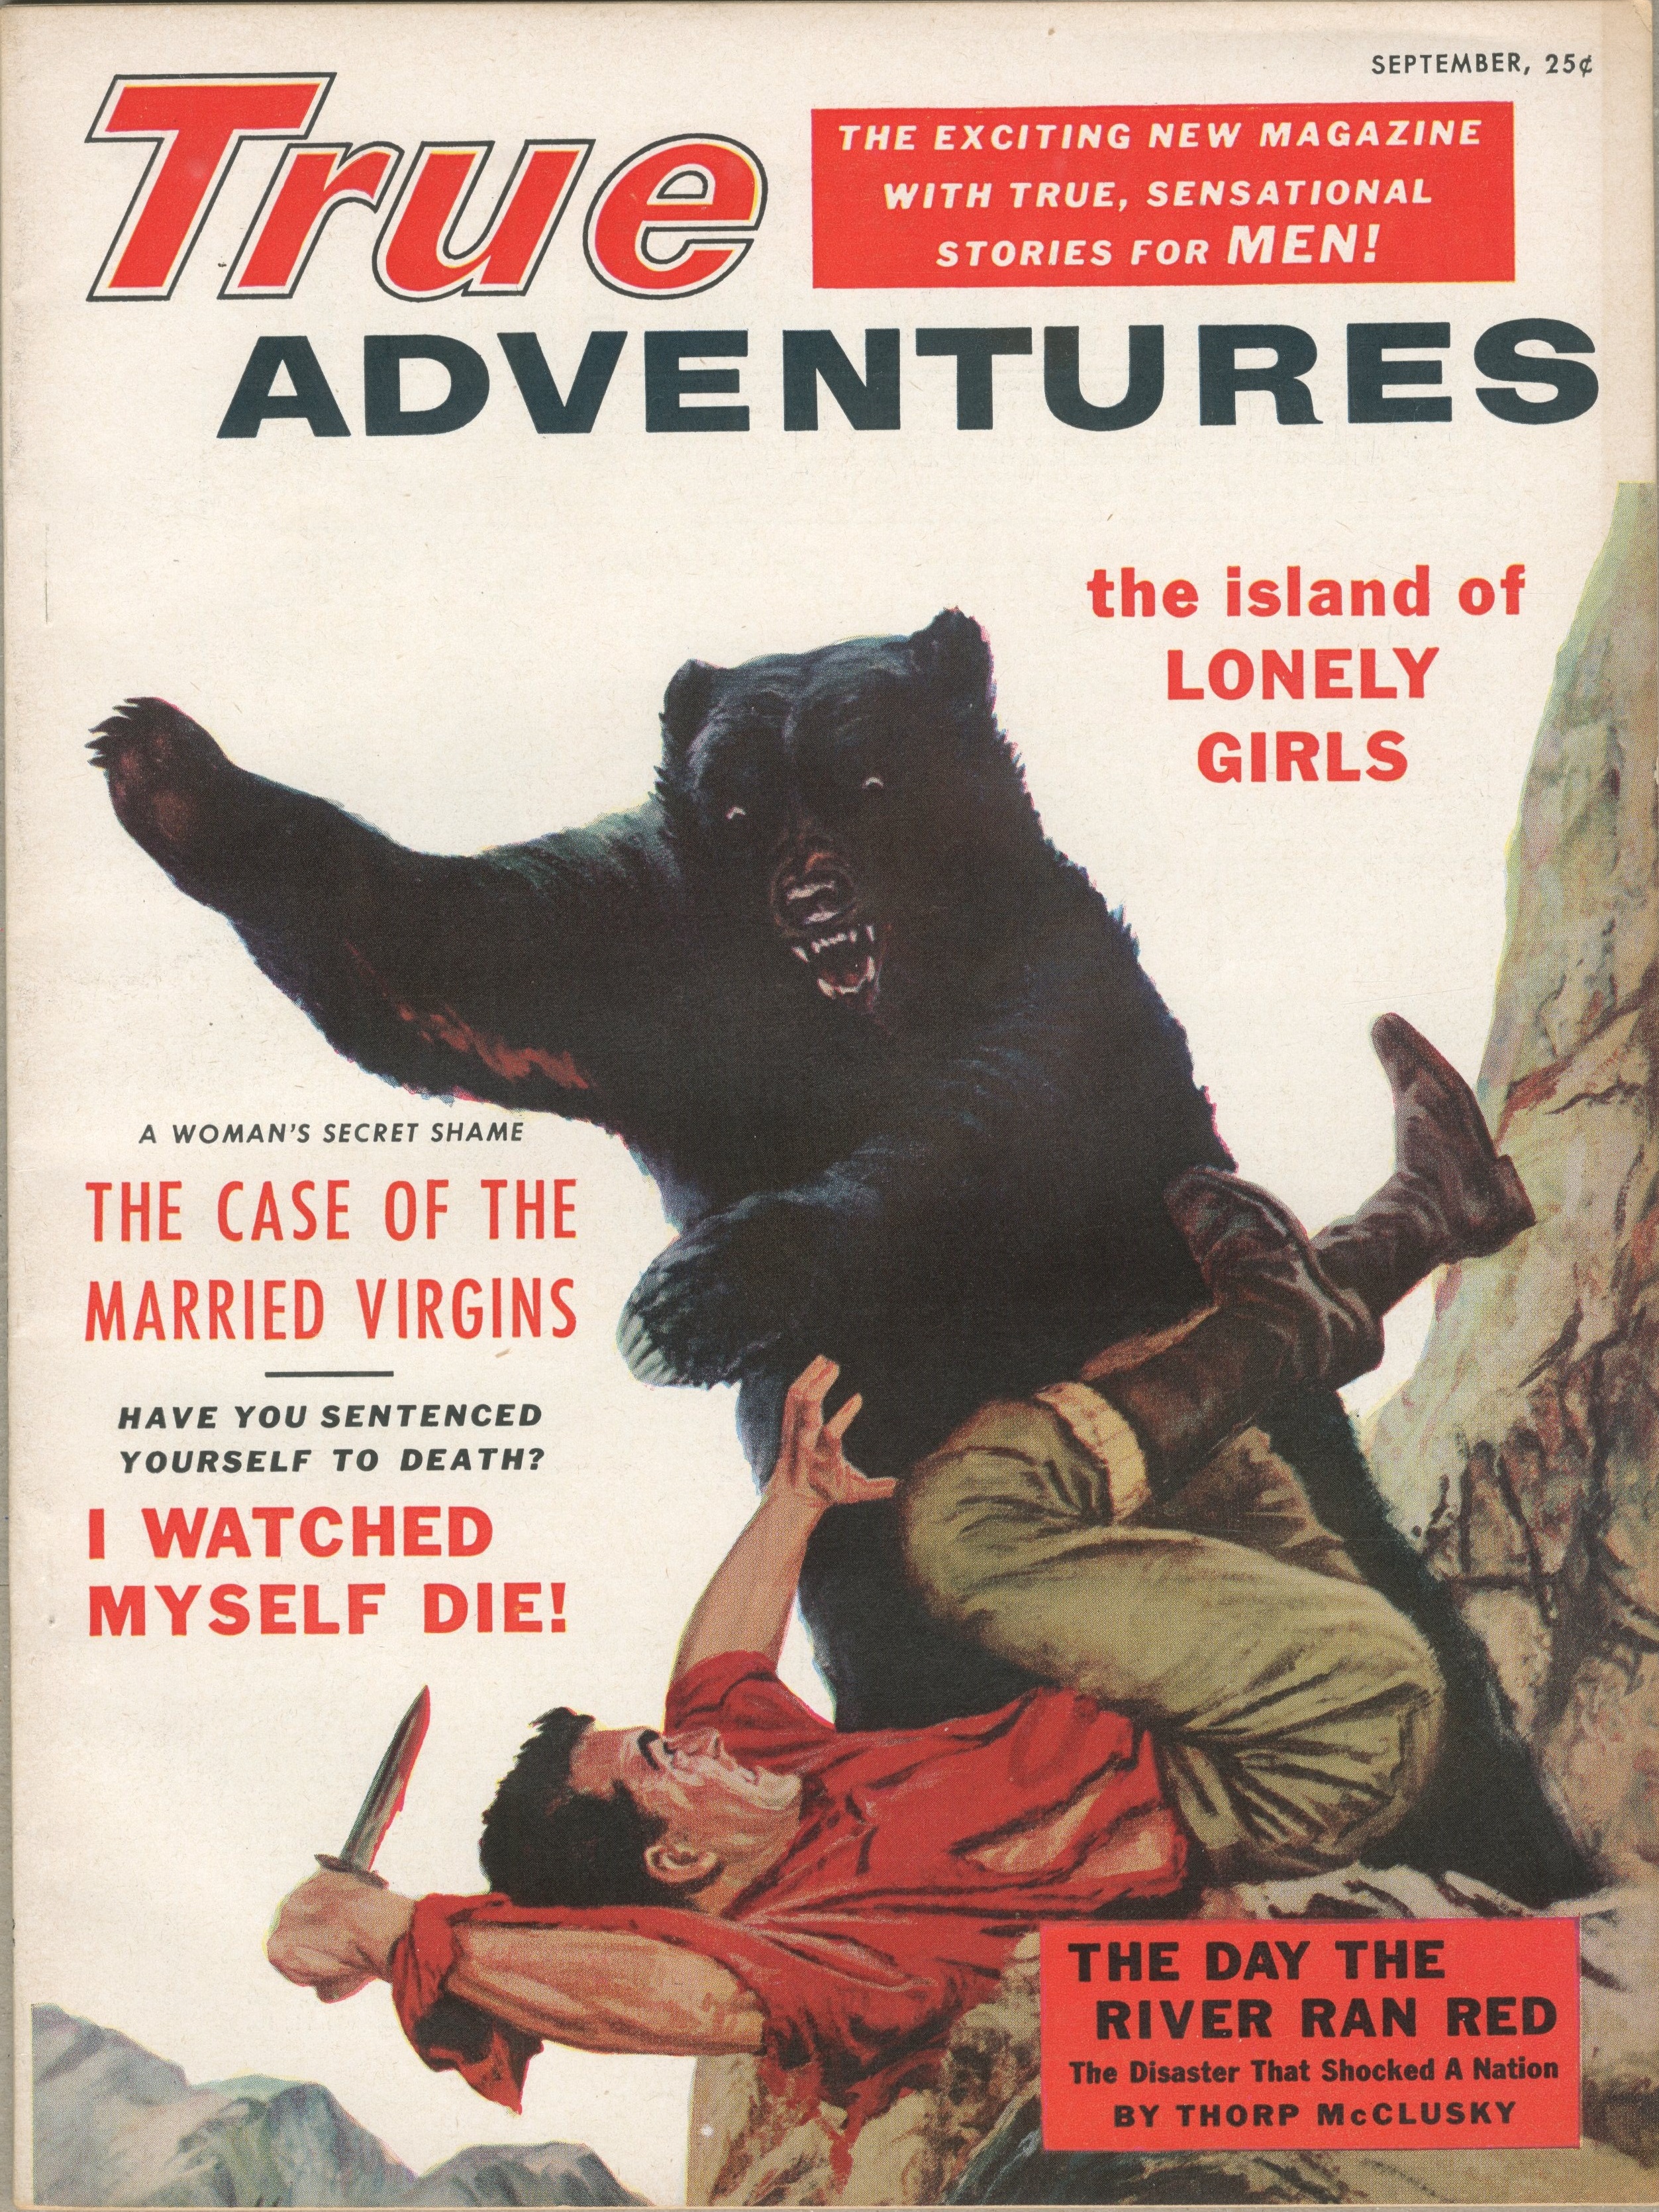 20684104-True Adventures - 1955 09 Sept - bear attack painting by Frank Cozzarell